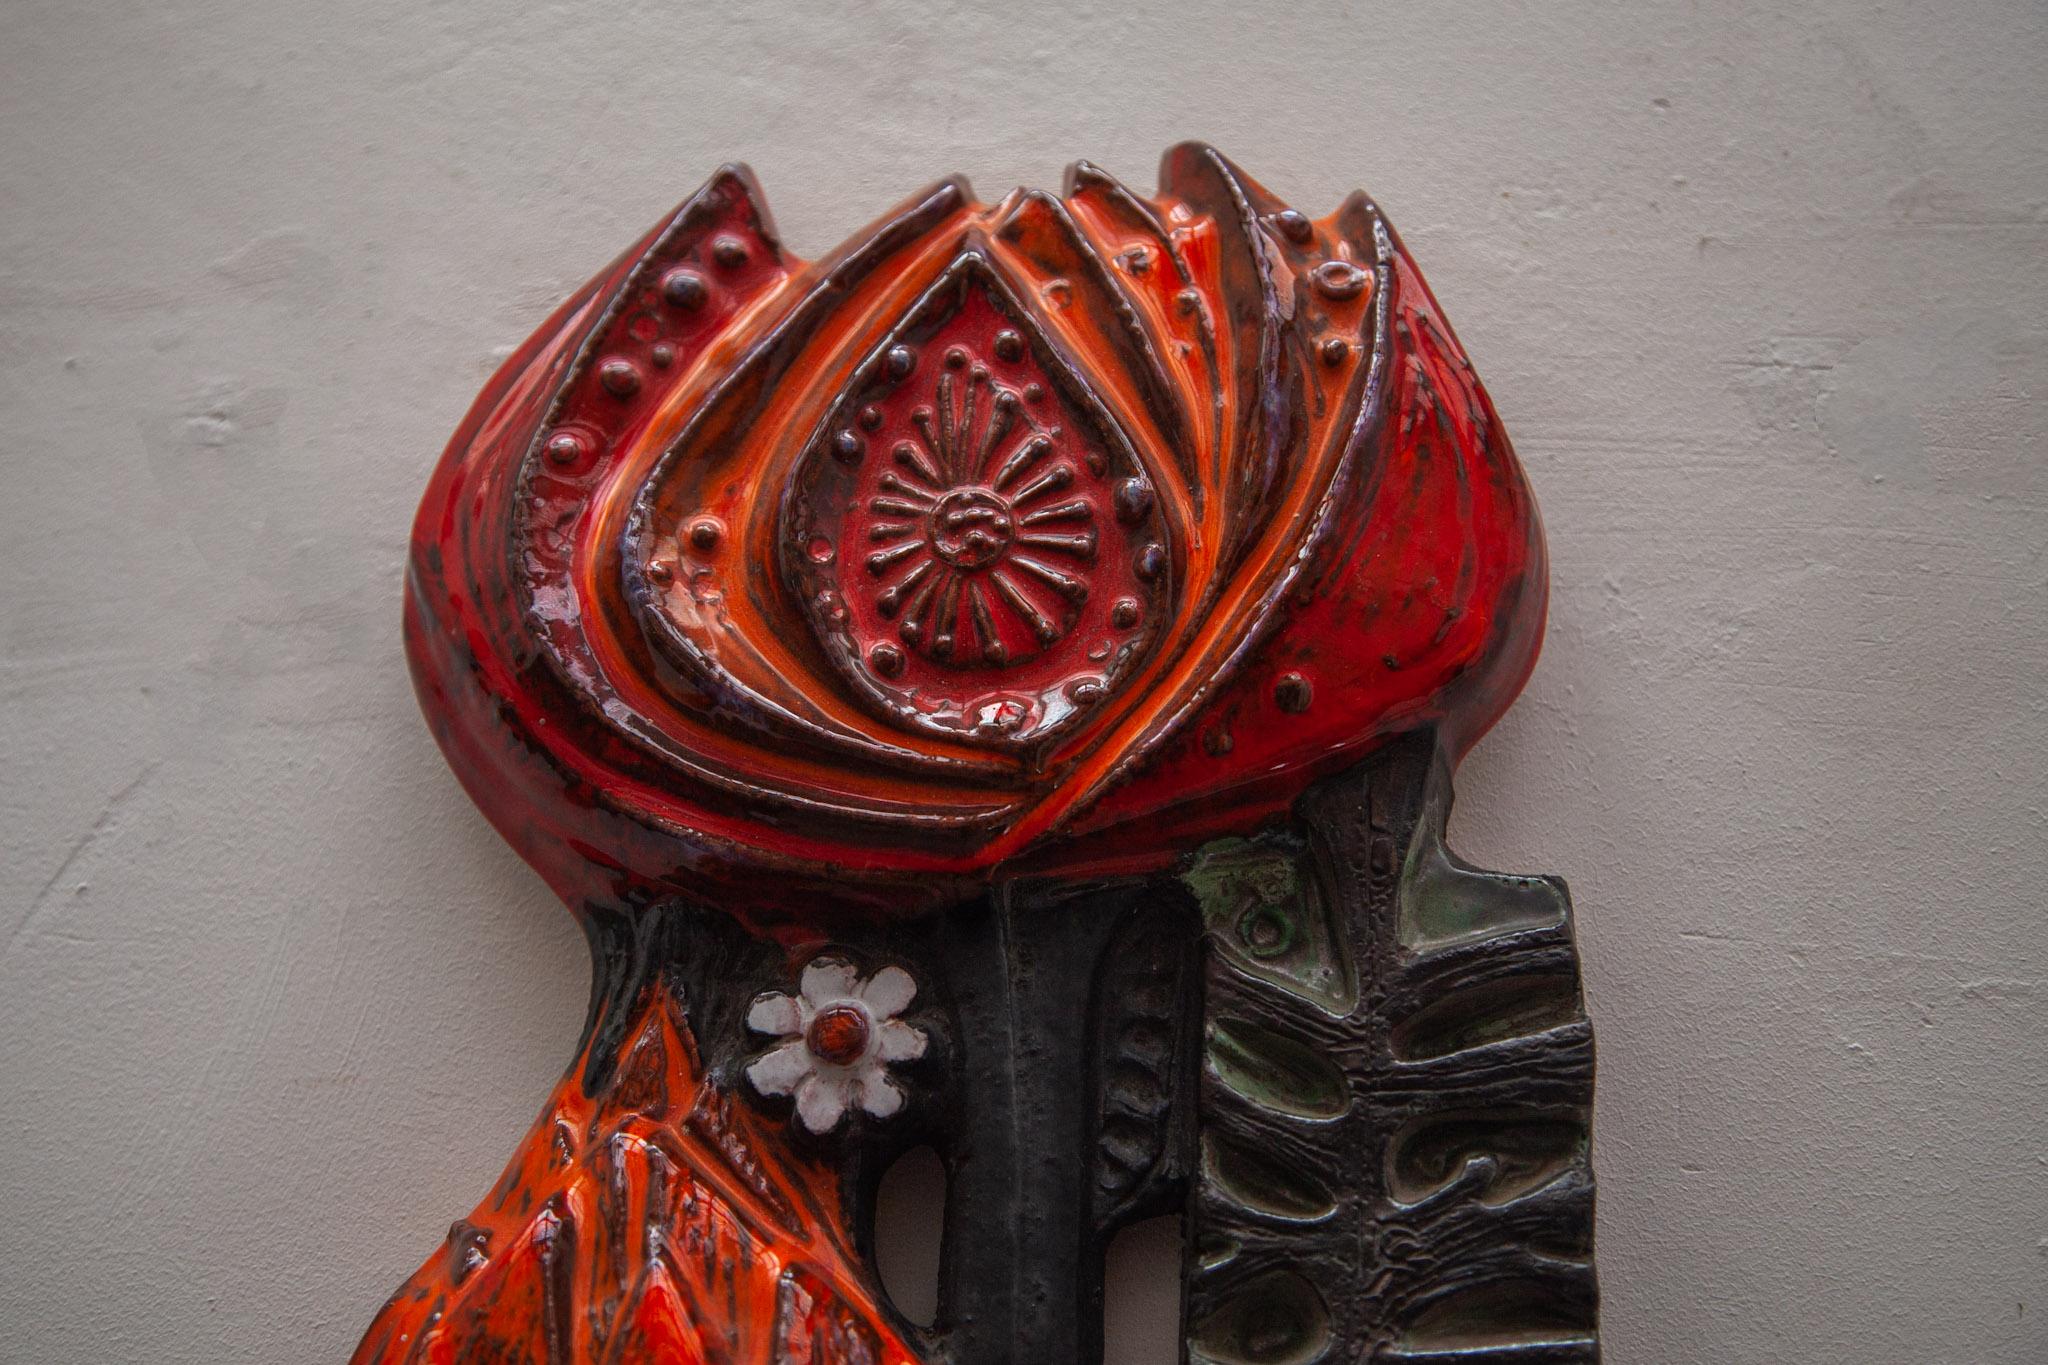 Mid-20th Century Wall Mounted Ceramic Flower Wall Sculpture by Perignem, 1960s